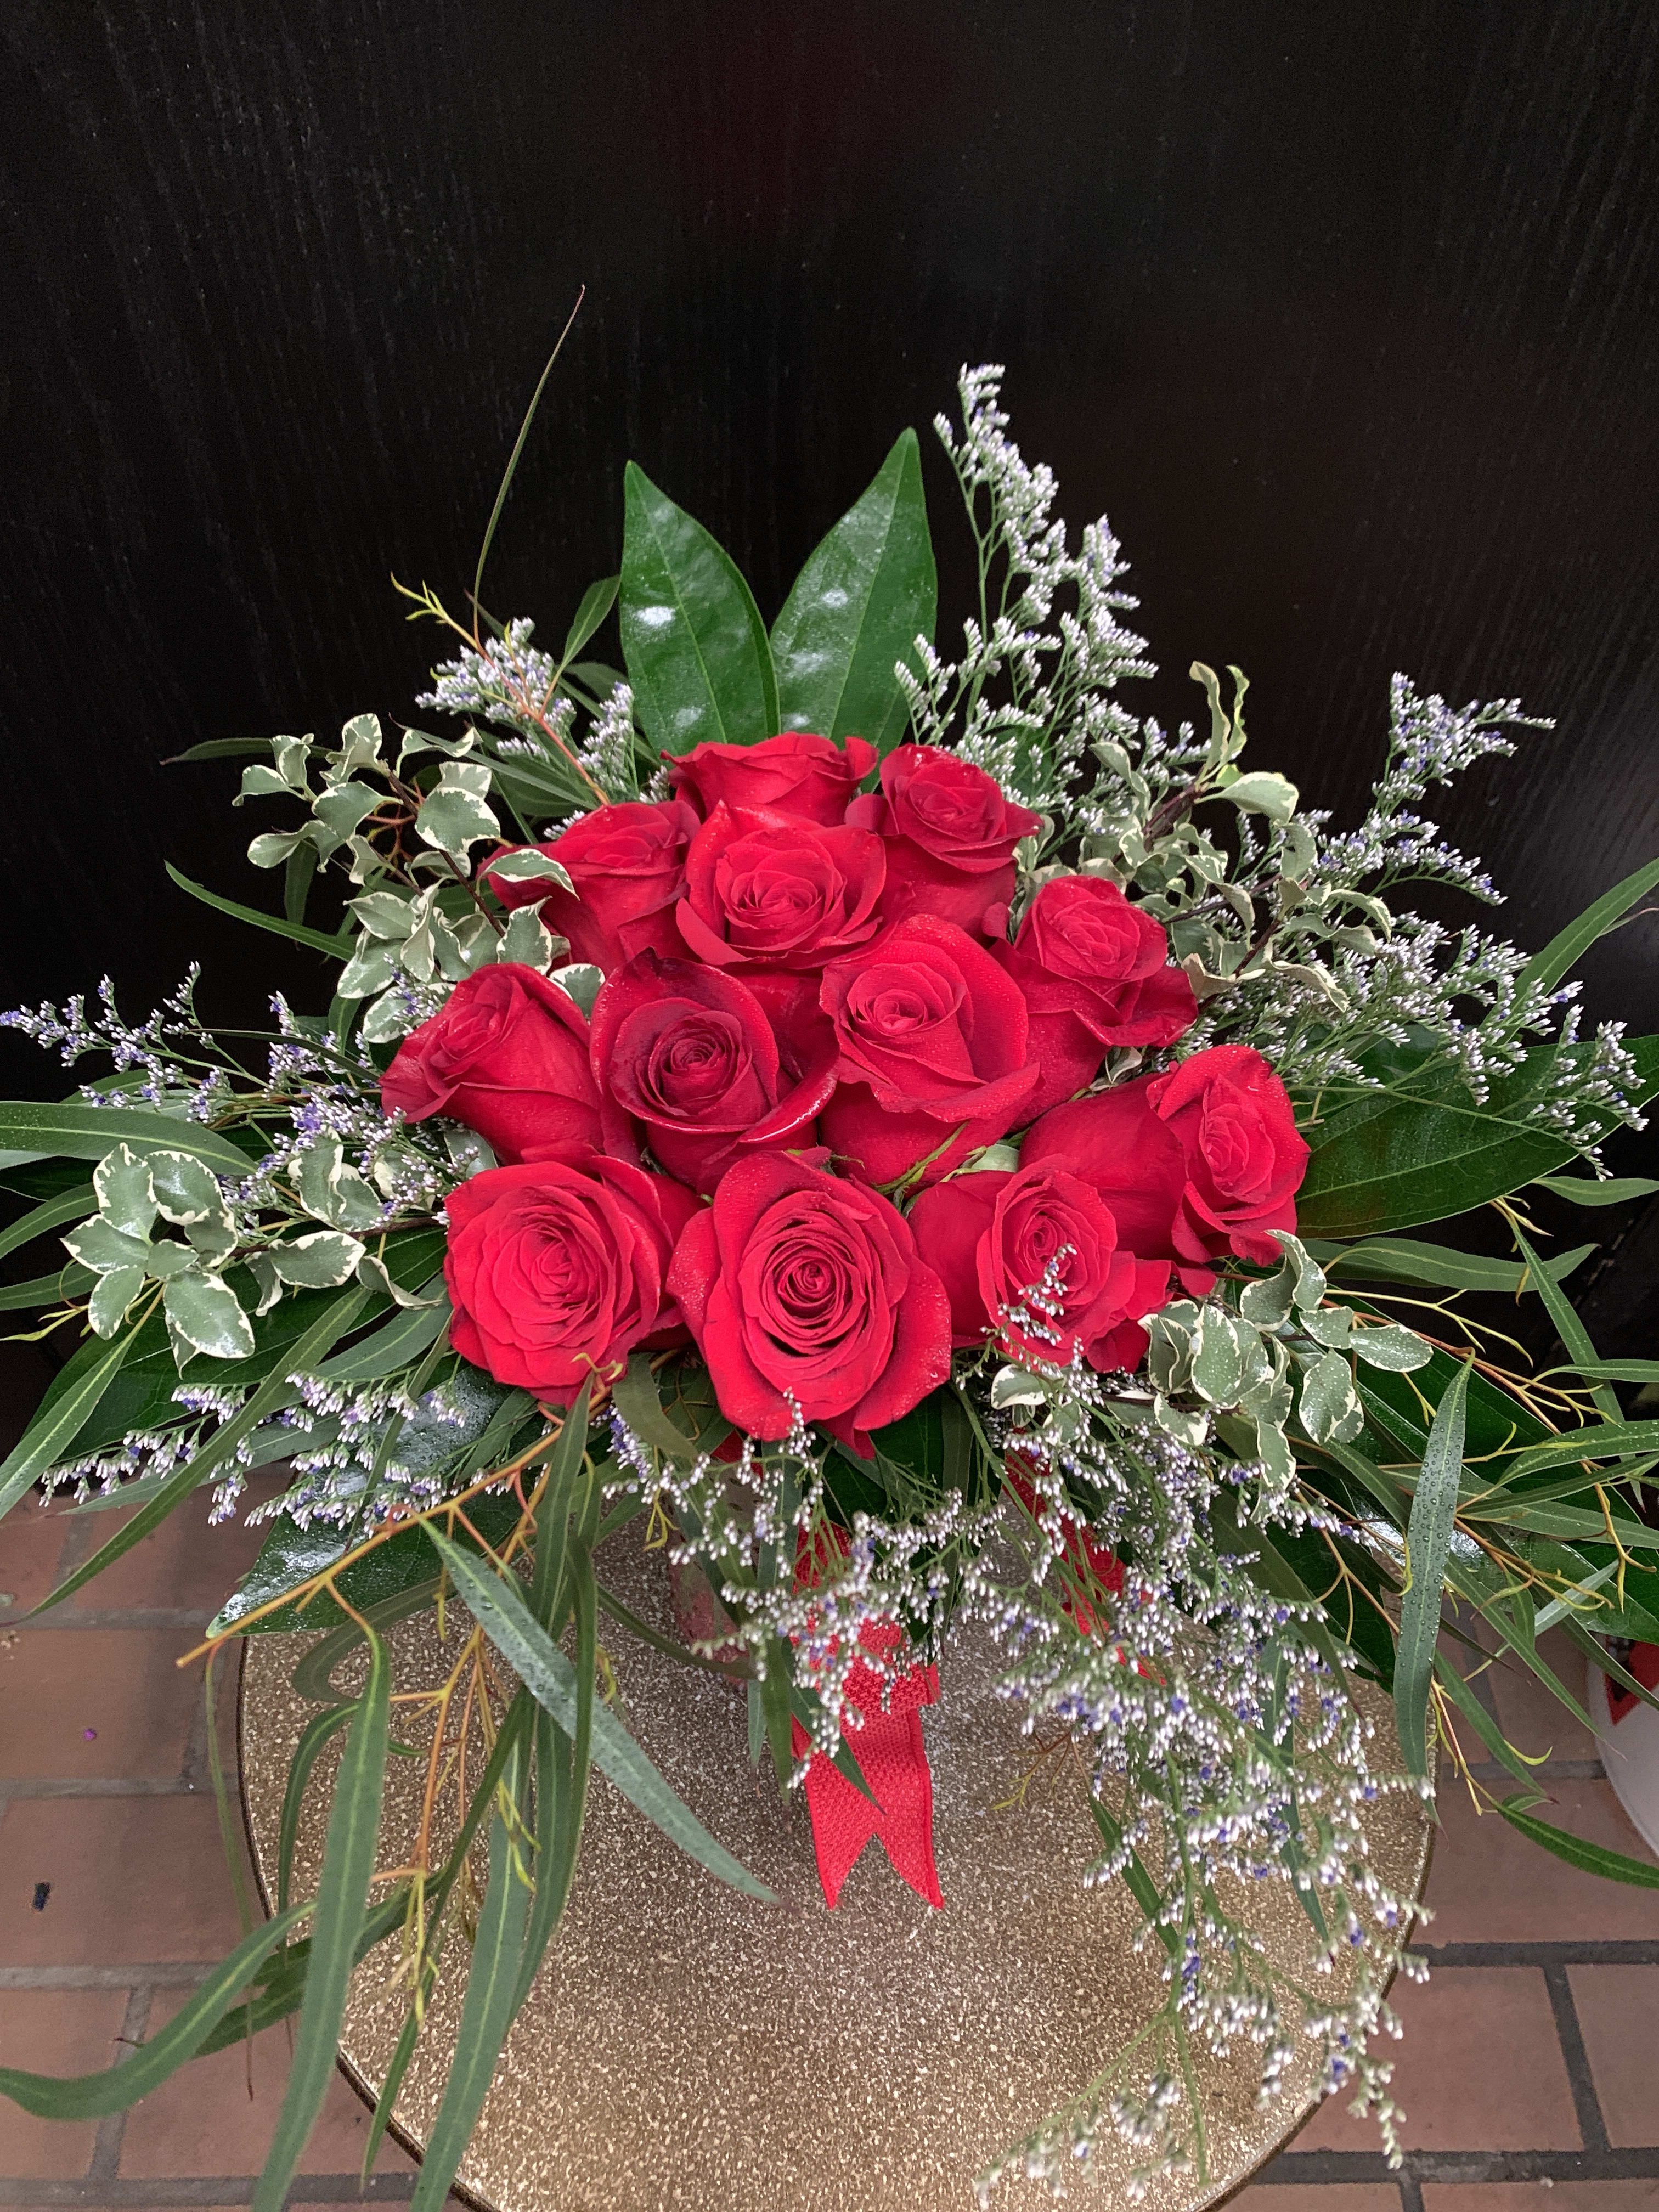 Dozen Low &amp; Lush Roses - Our specialty! Gorgeous roses! Enough said! Available in mixed or solid colors. Red, yellow, white, pinks, lavender, oranges and bi-colors. 